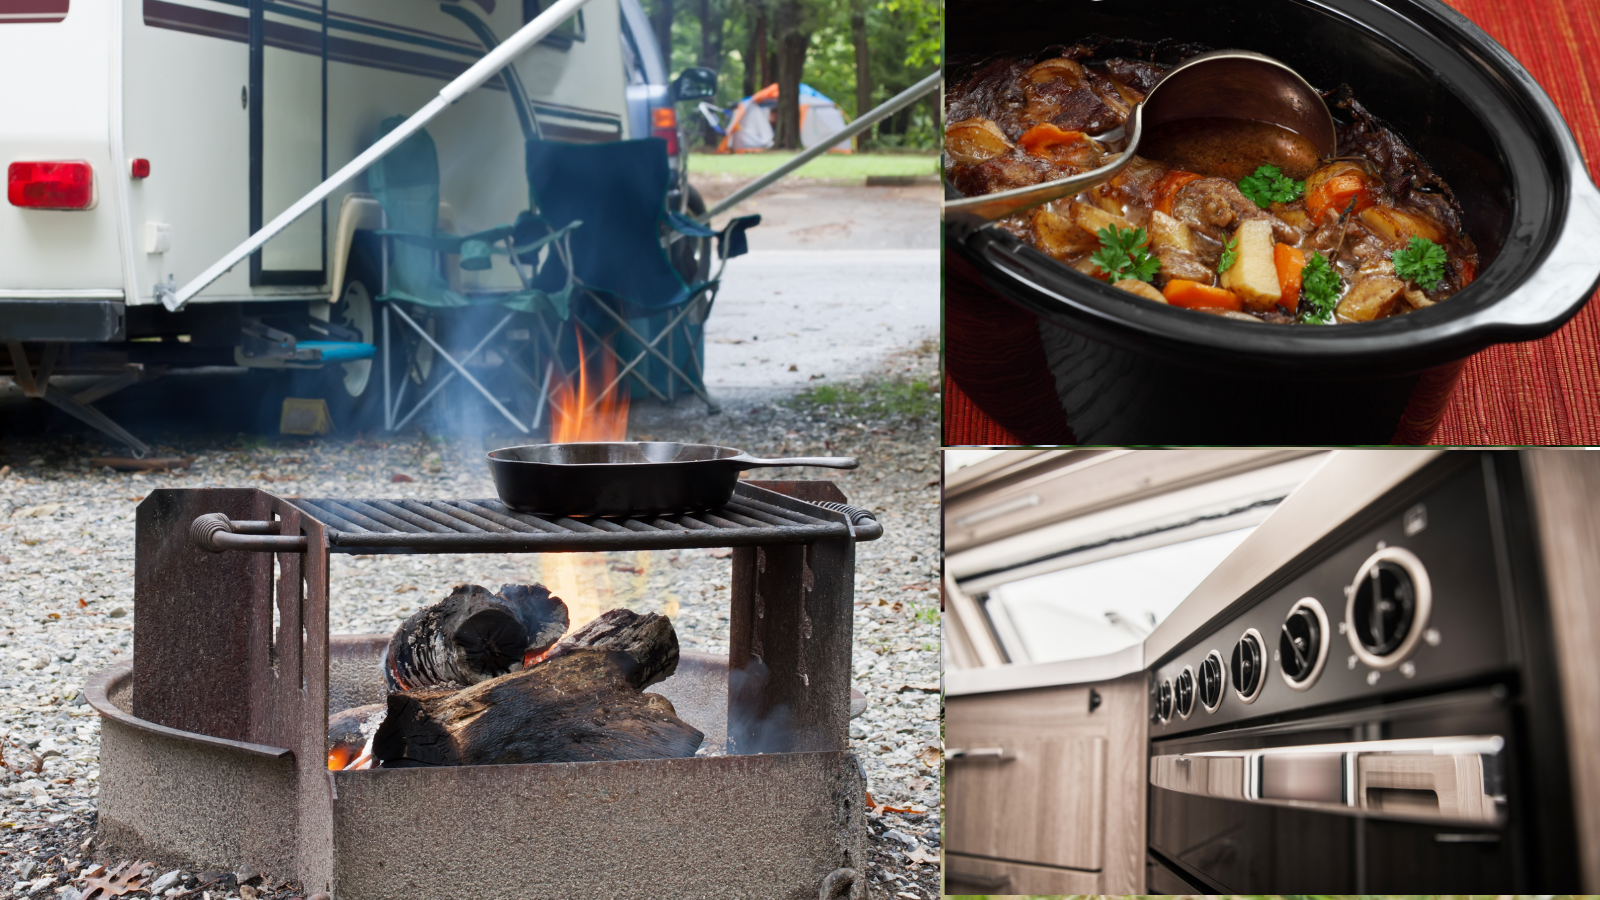 https://www.michiganrvandcampgrounds.org/wp-content/uploads/2022/11/cooking.png